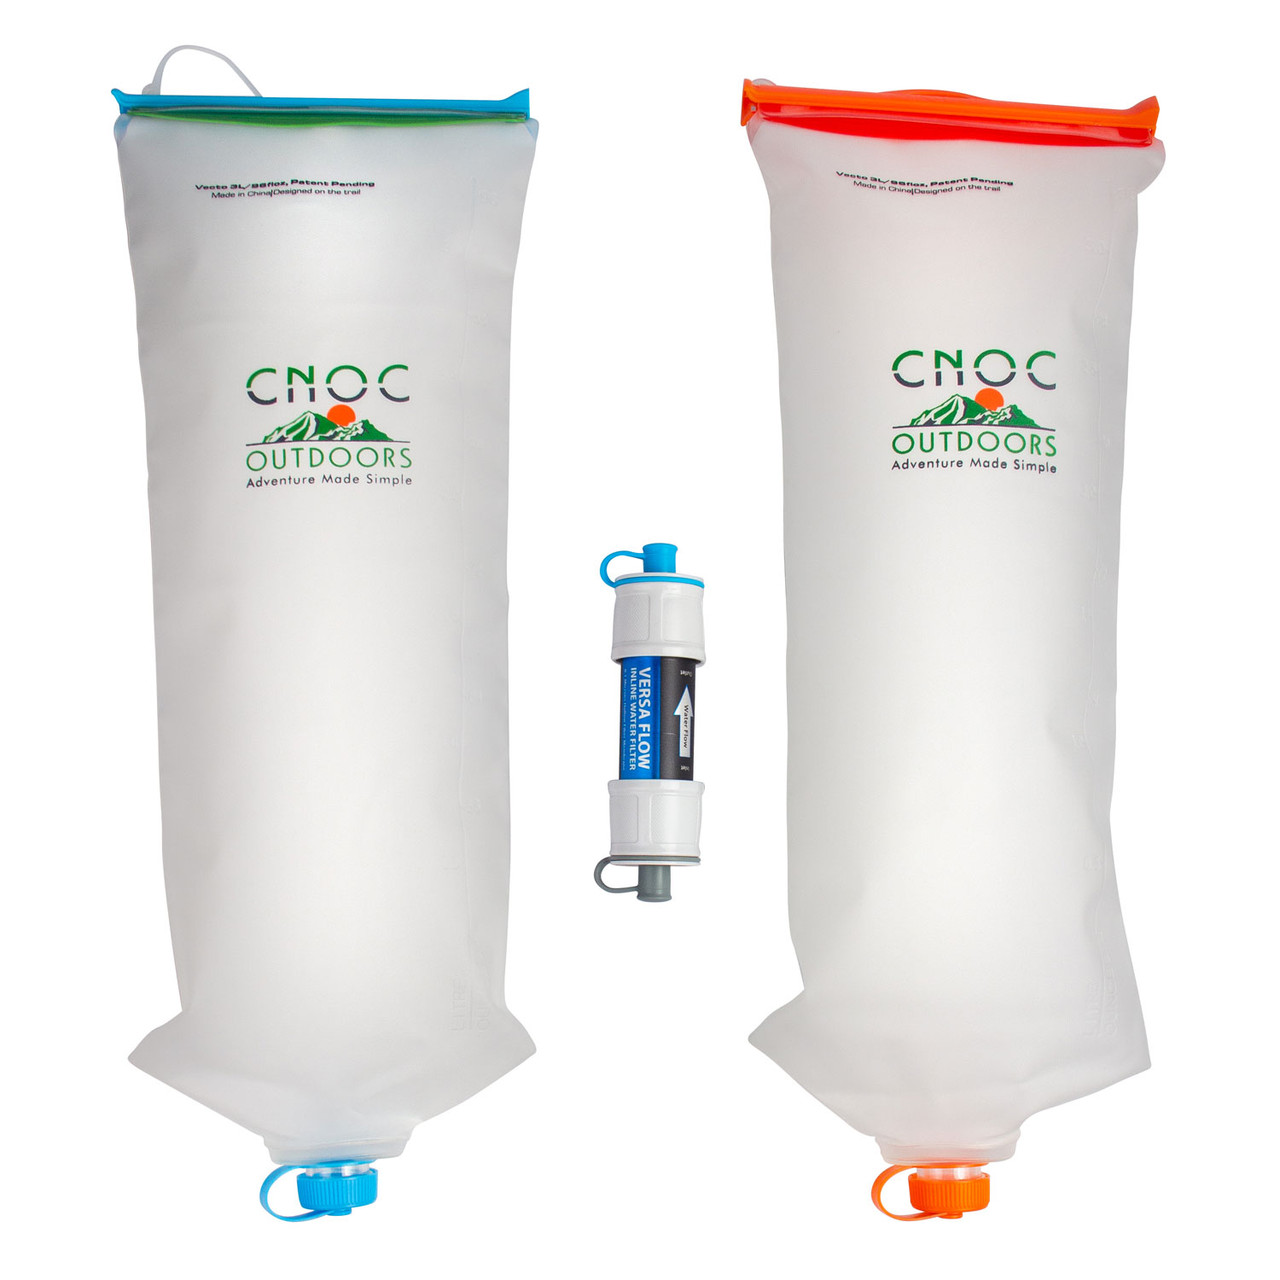 Versa Flow Water Filter and Two CNOC 3L Vecto Water Containers - Orange and  Blue